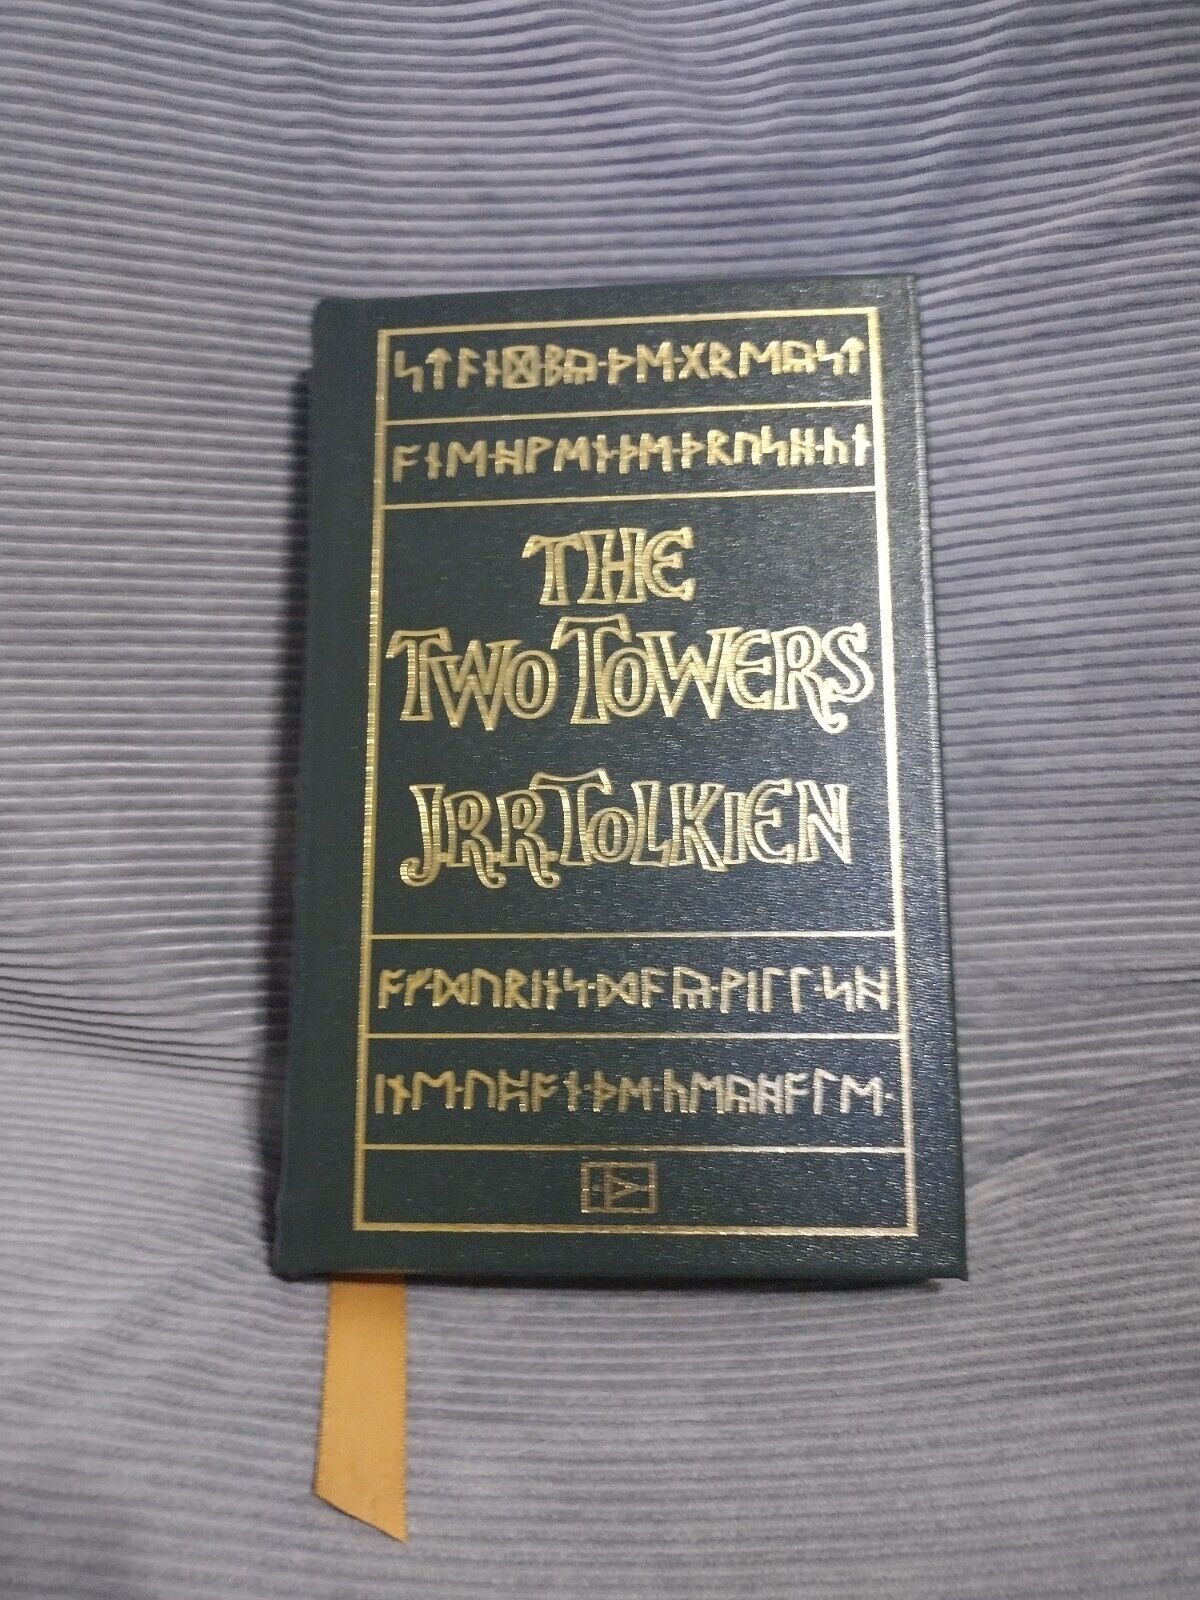 Rare The Hobbit Misbound Easton Press 1966 J.R.R. Tolkien Lord of the Rings LOTR